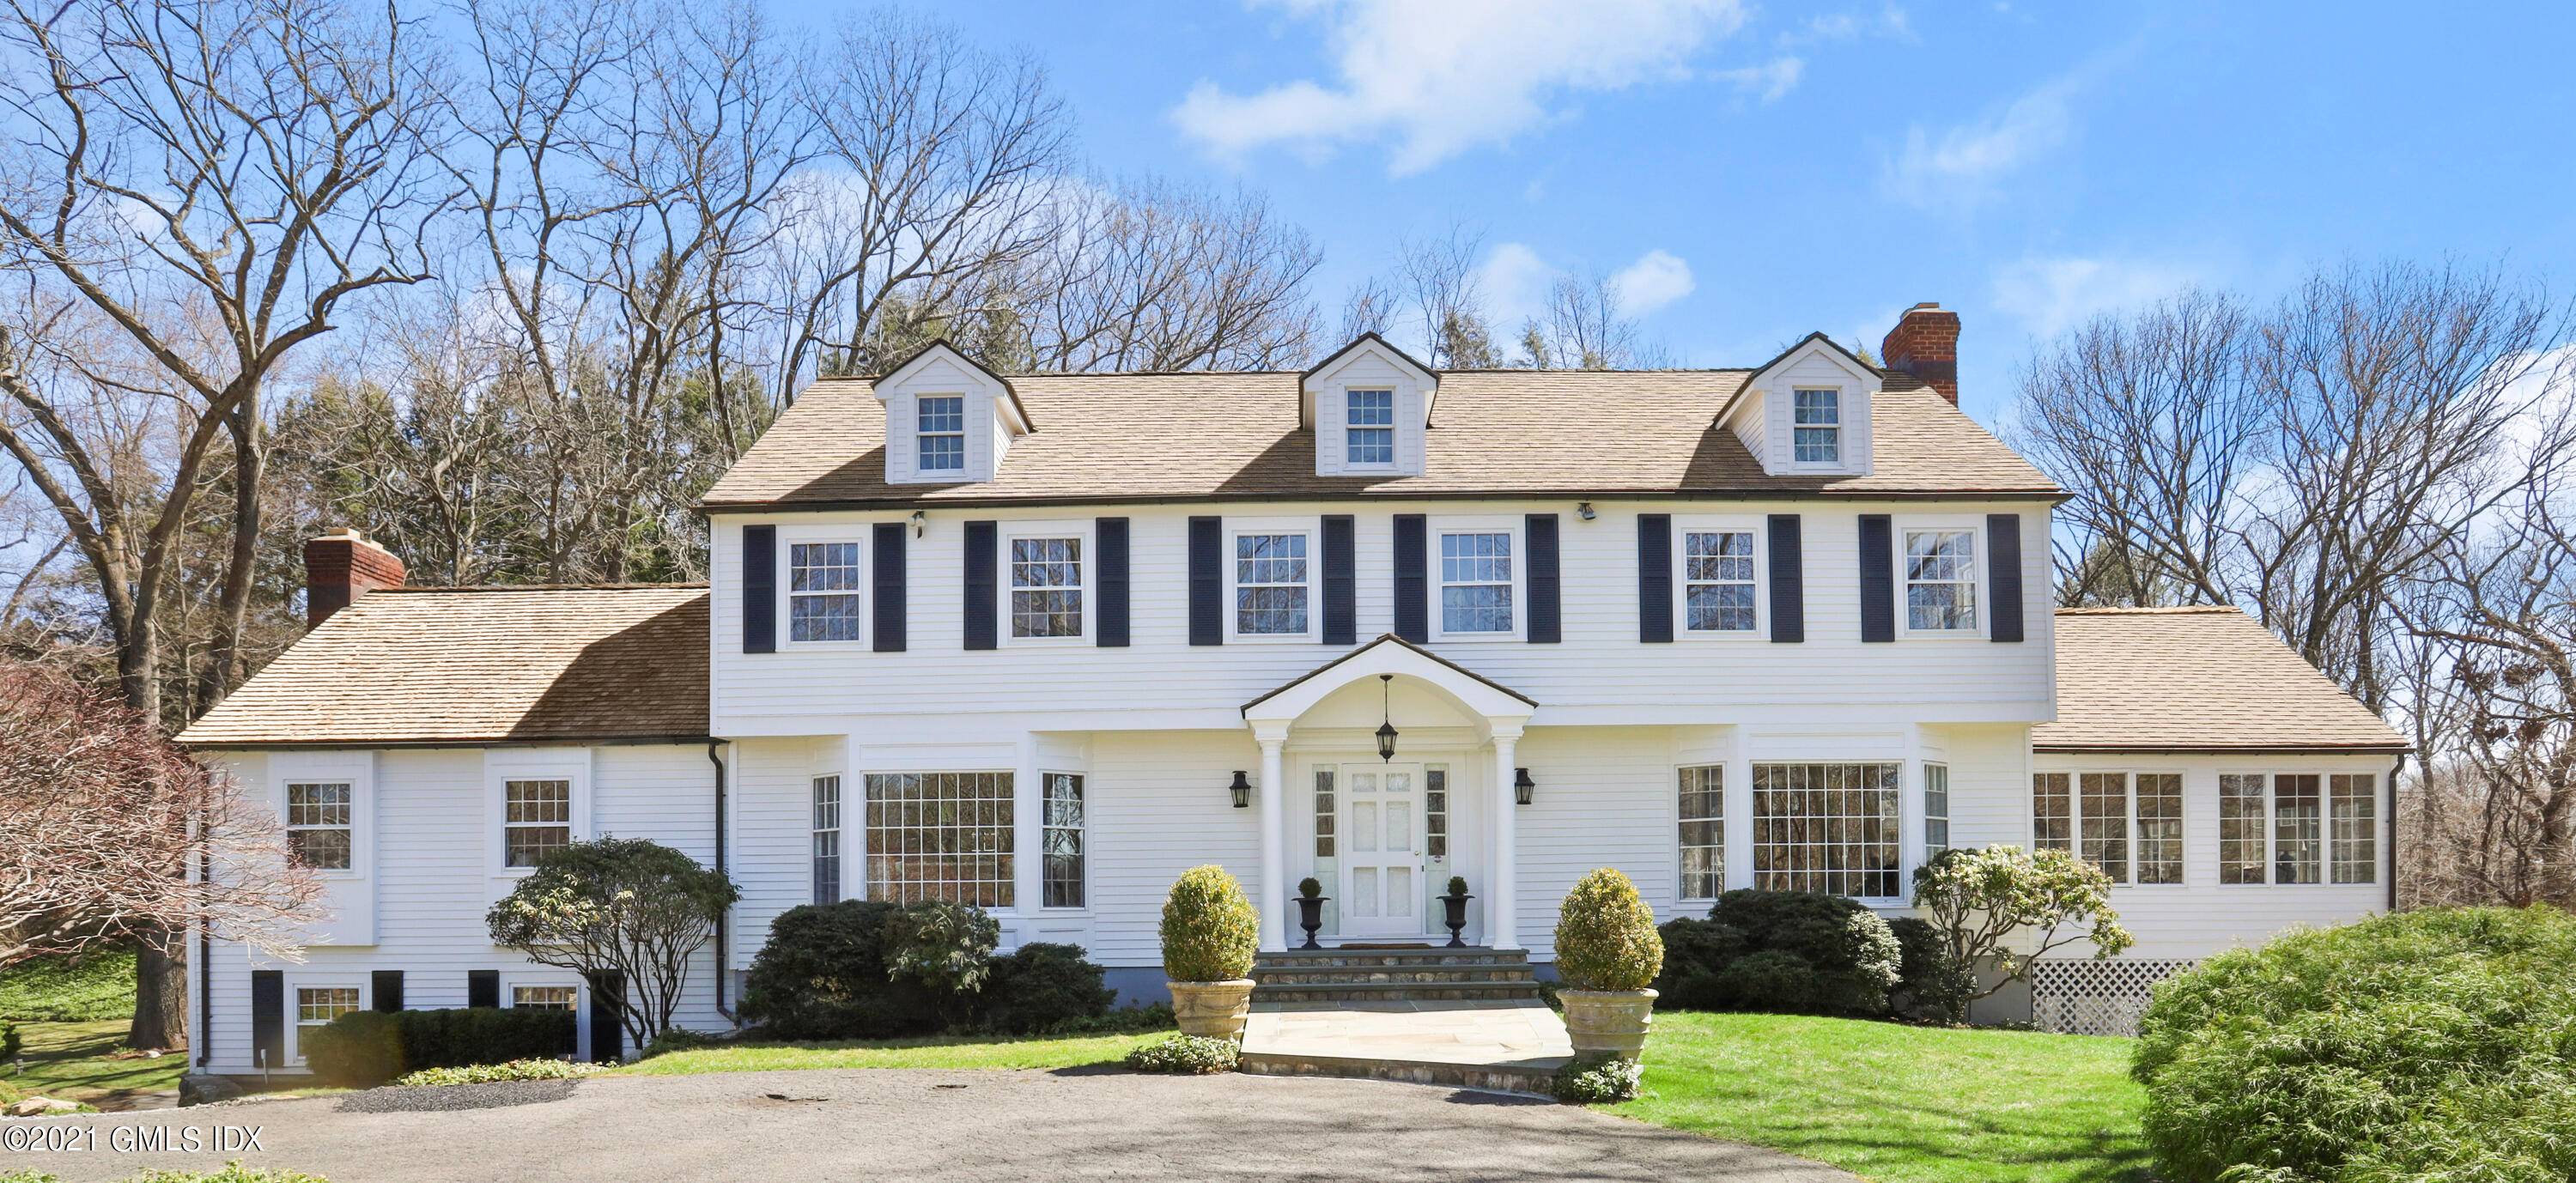 New to Market ! Gracious 5 bedroom beautifully renovated Mid country Colonial on 2 landscaped acres with great vistas.